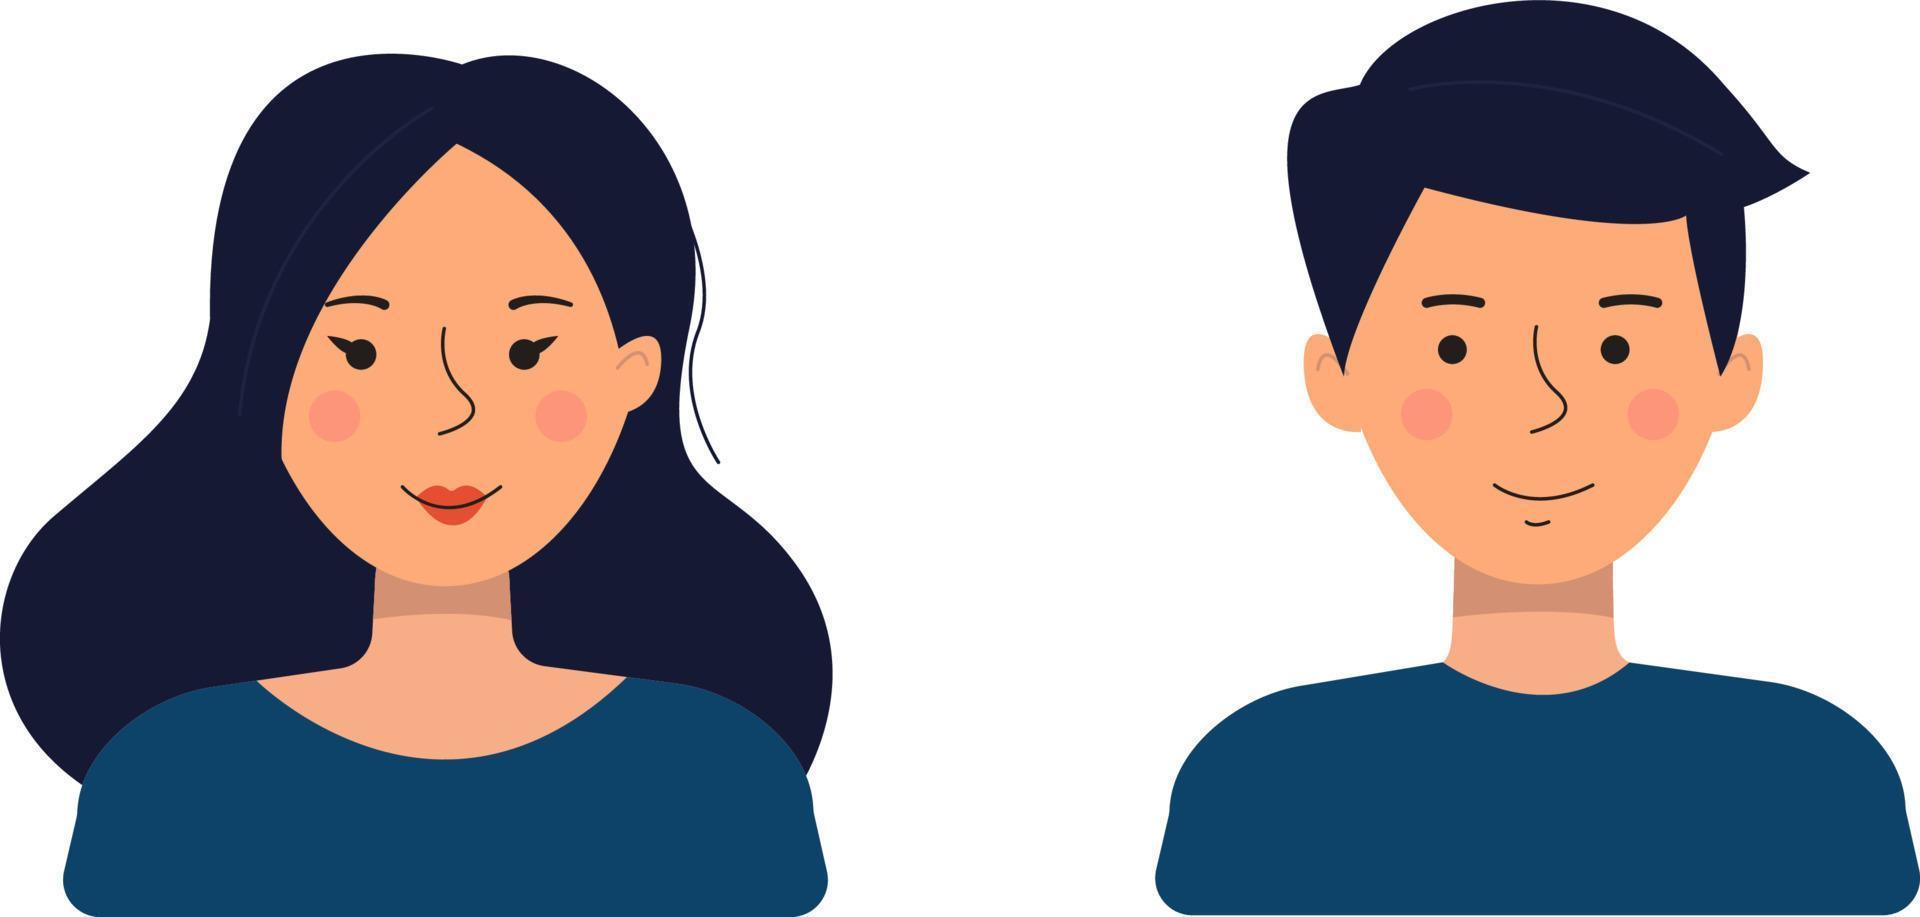 Avatars of people in a flat style. Vector illustration of a man and a woman isolated on a white background.